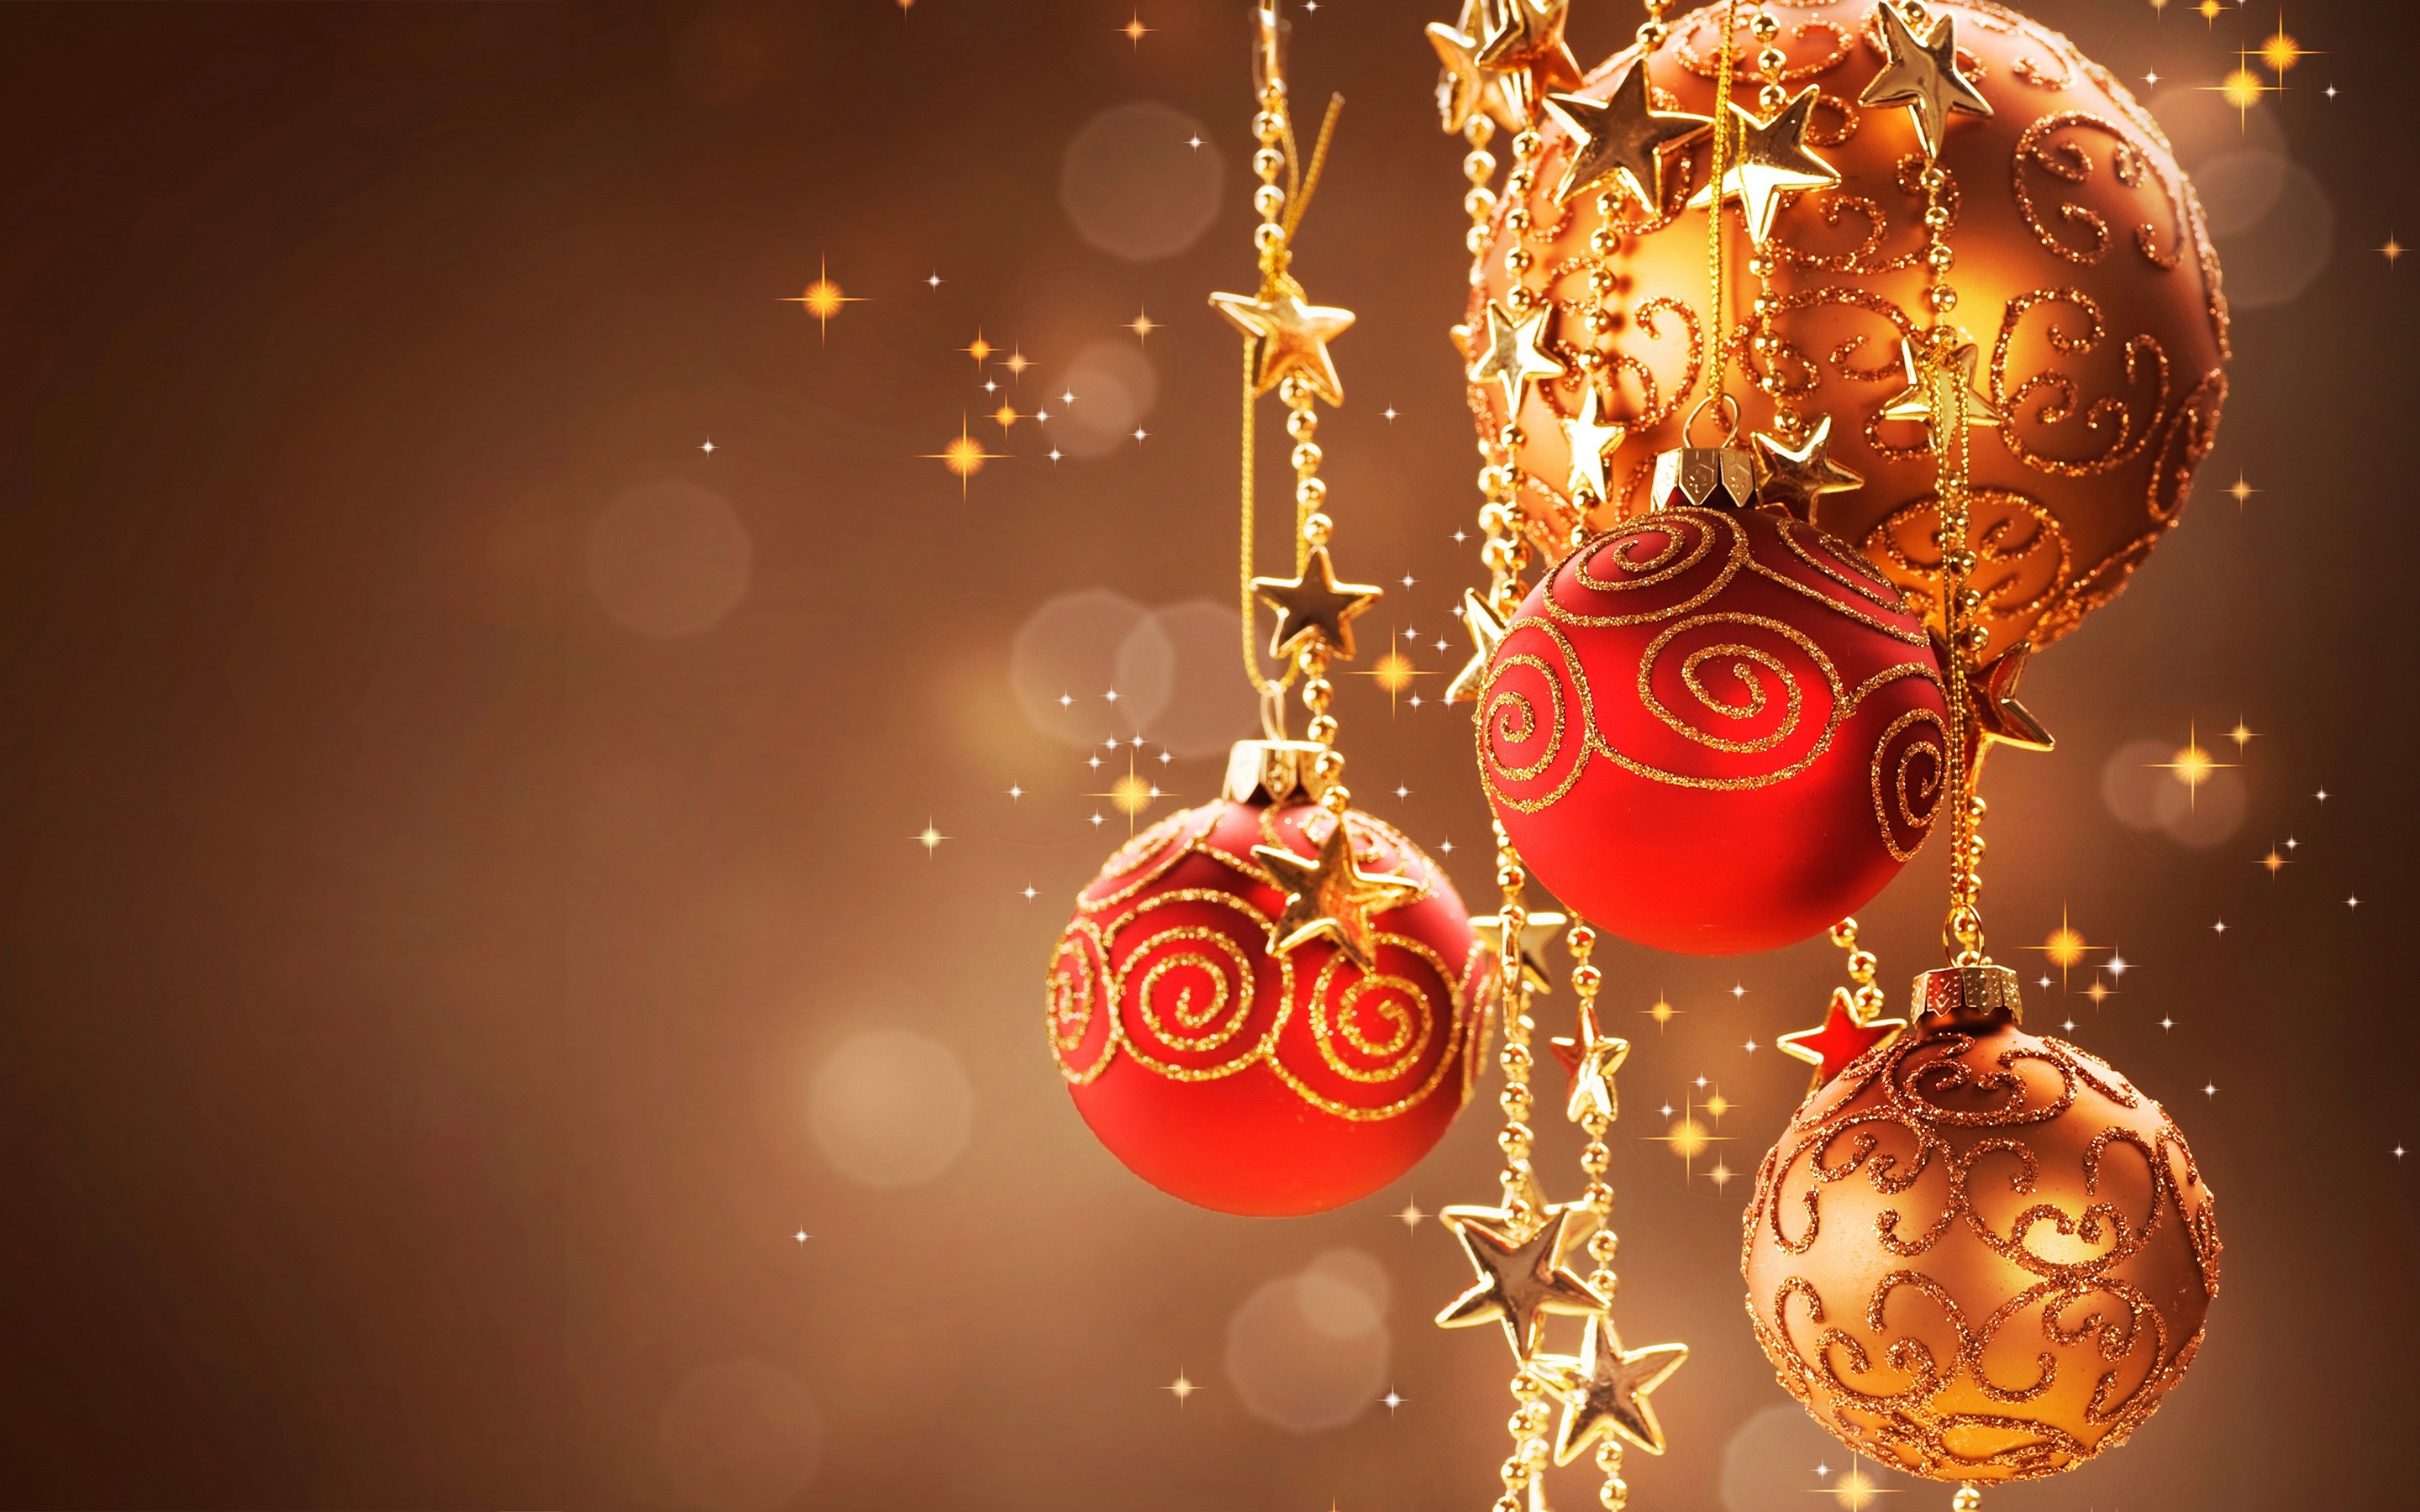 Christmas Wallpapers & Images: Christmas HD Wallpapers for Desktop ...